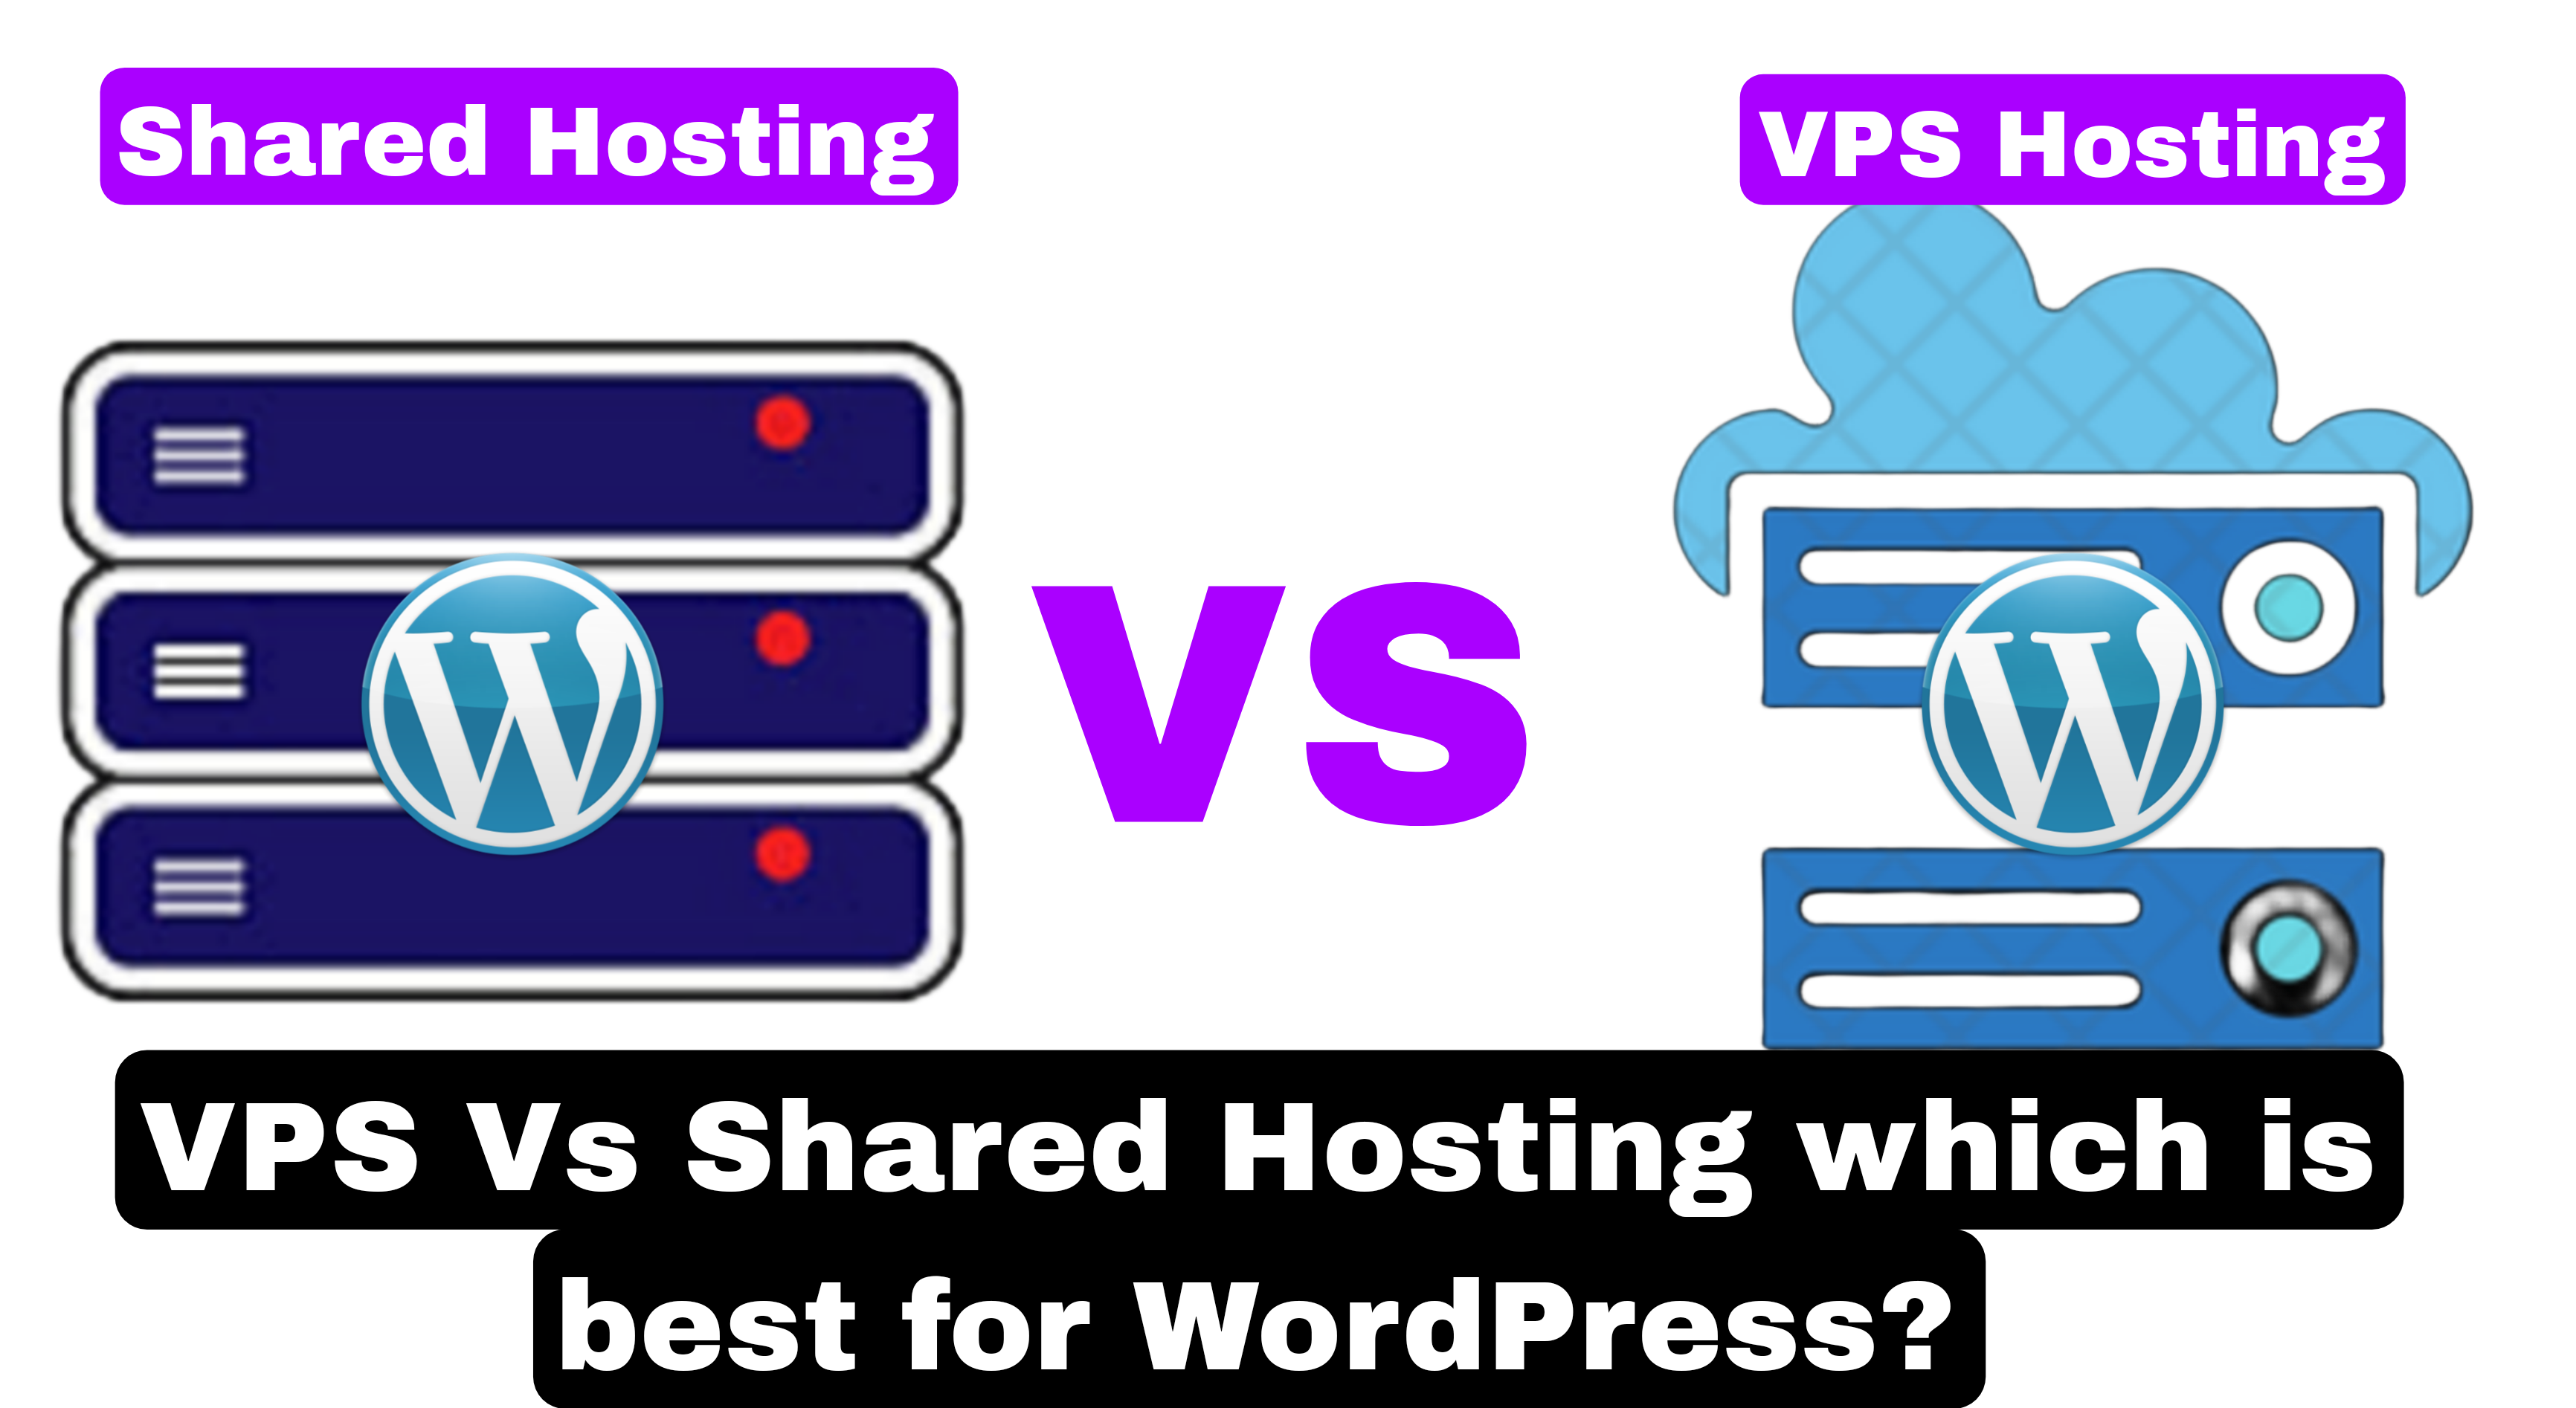 VPS Vs Shared Hosting which is best for WordPress?